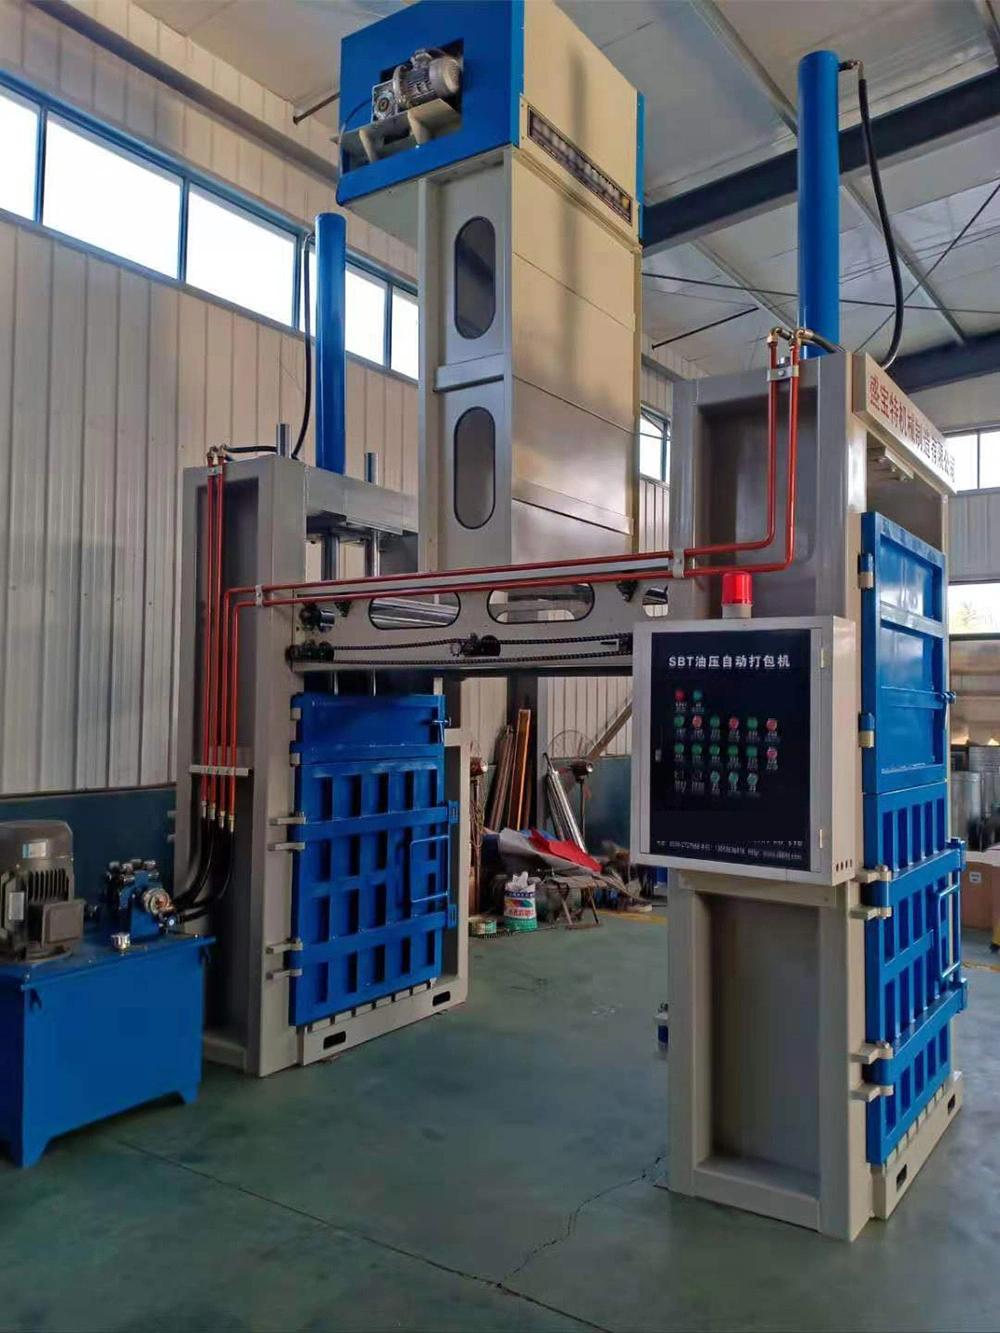 Automatic Packaging Machine for Waste Paper, Automatic Packaging Machine for Waste Paper Boxes, Corrugated Boxes, Plastic Films, etc.